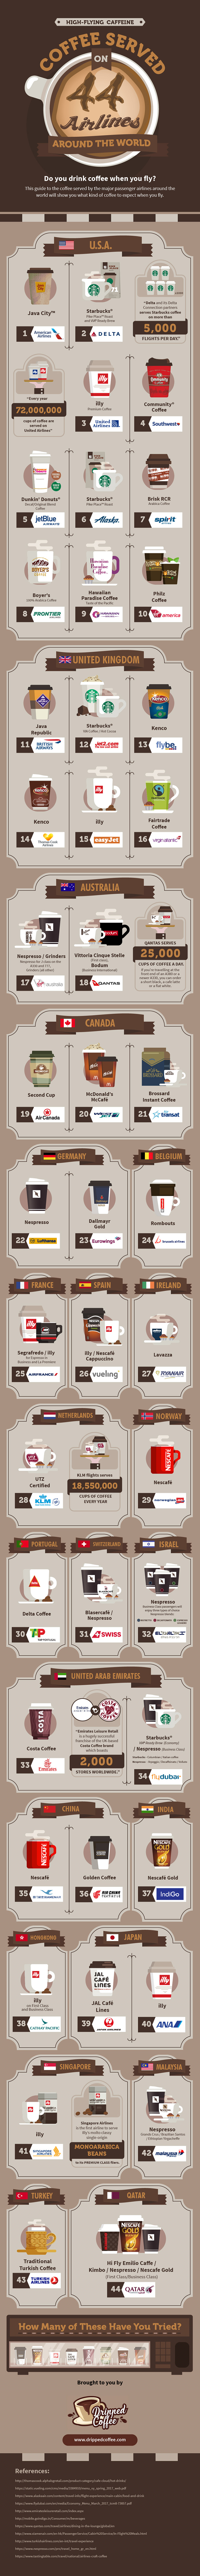 See Which Type of Coffee Your Favorite Airline Serves